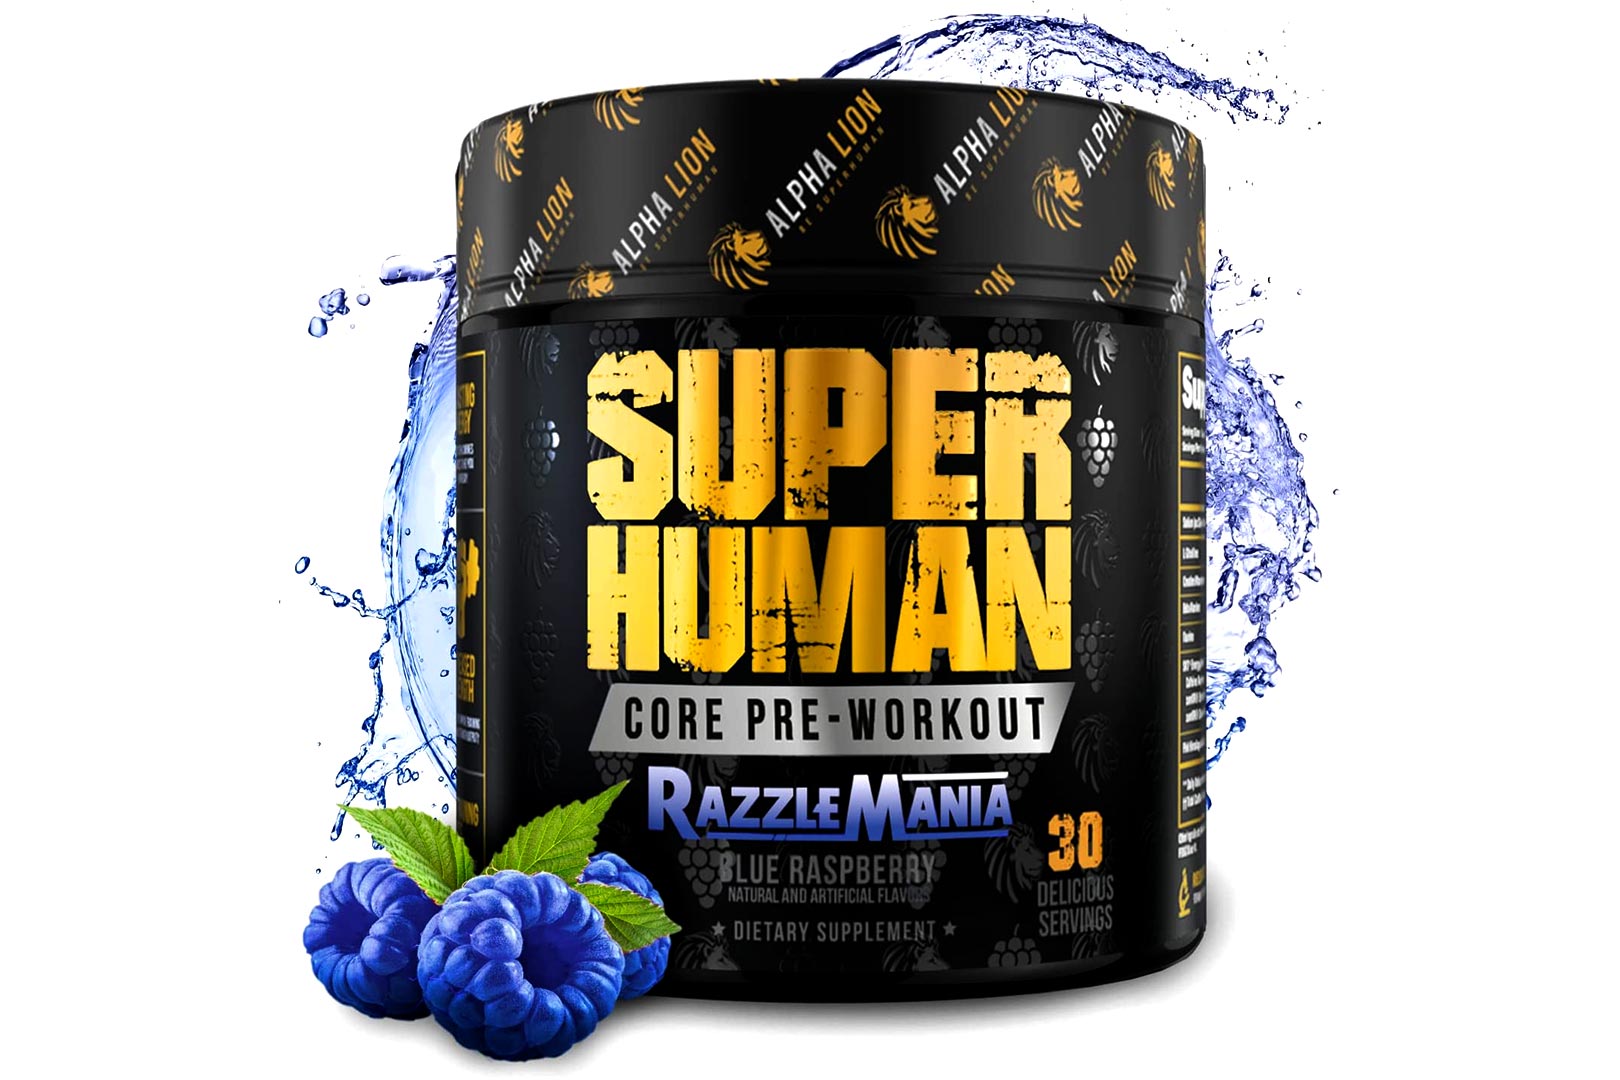 Alpha Lion creates a cost-effective pre-workout in Superhuman Core priced at $16.99